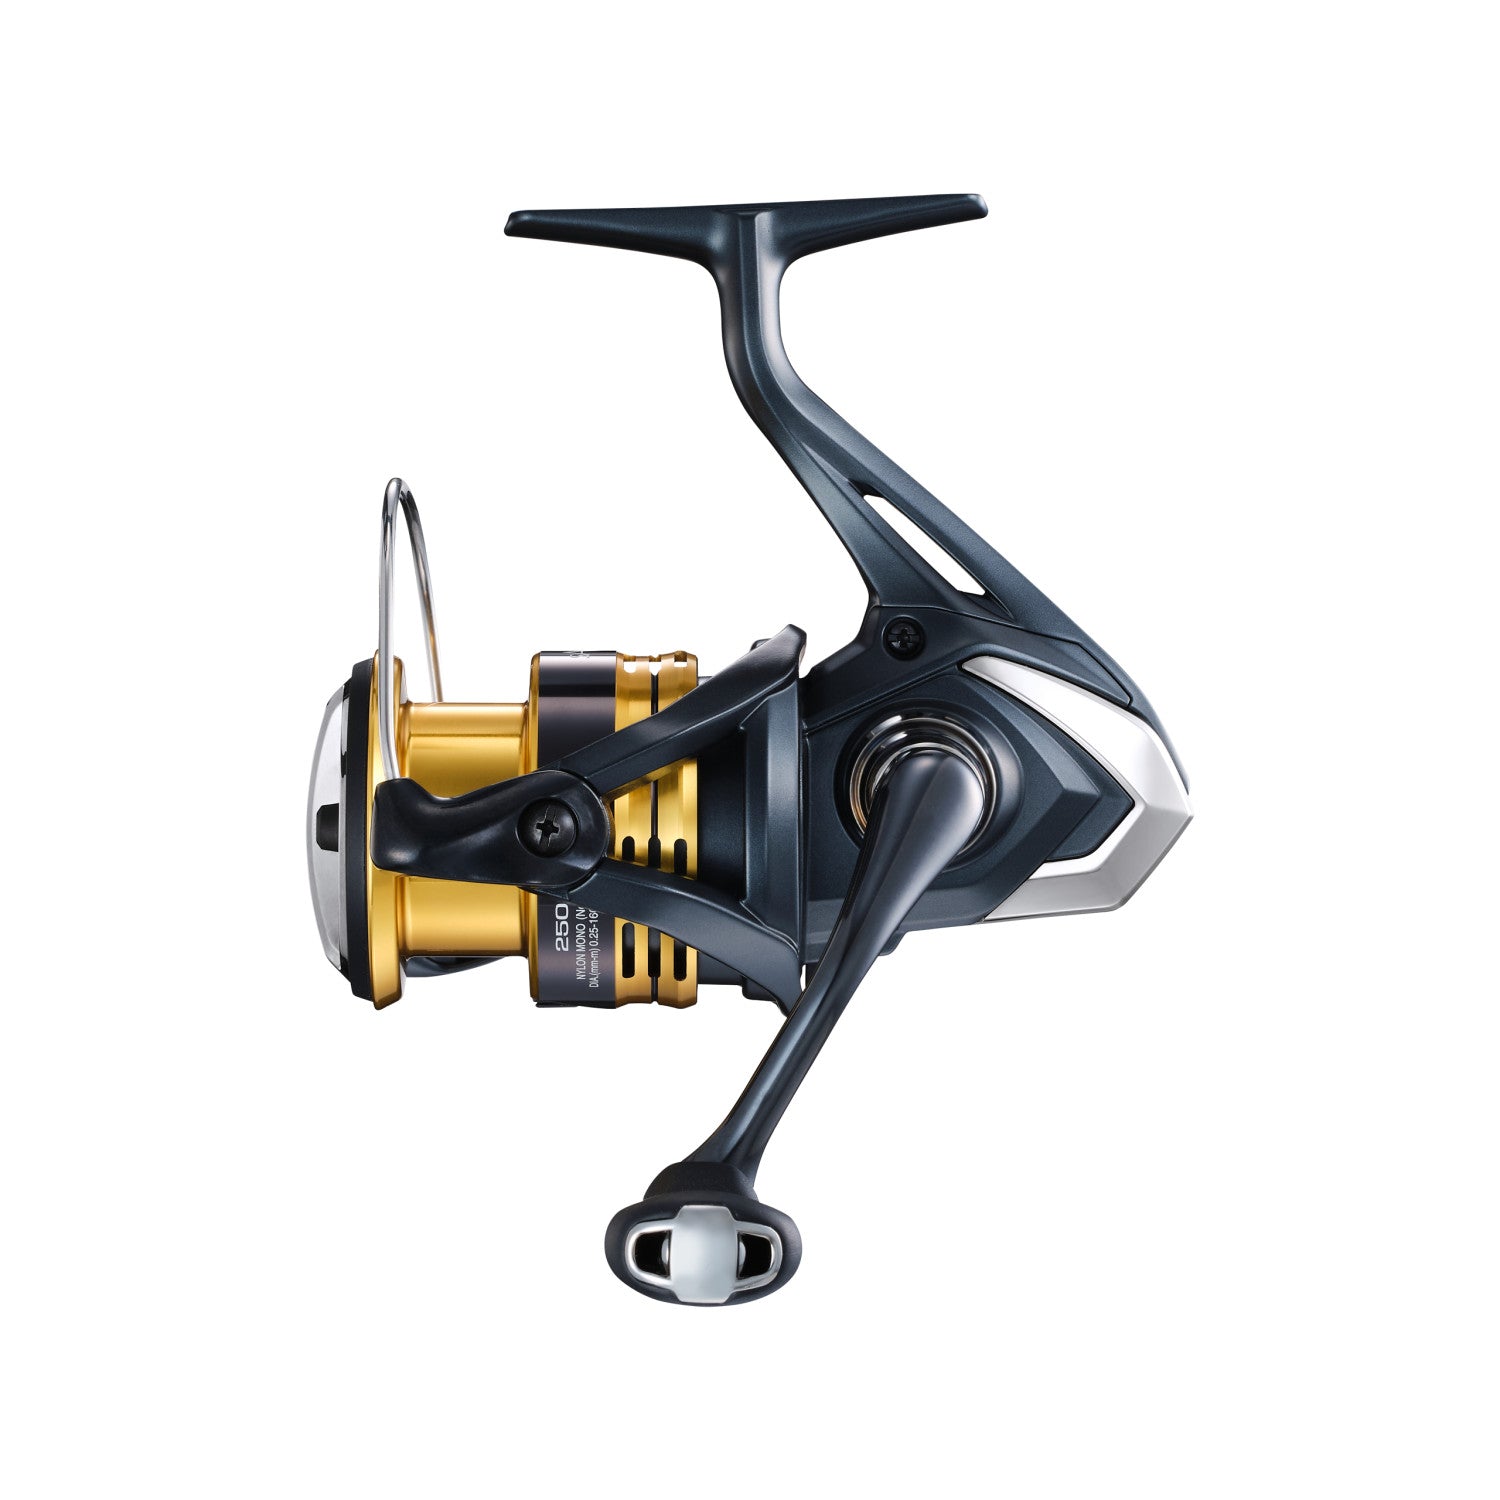 Find more Shimano Sonora 4000fb Reel & Shimano Sojourn 2 Piece Spinning  Rod. for sale at up to 90% off